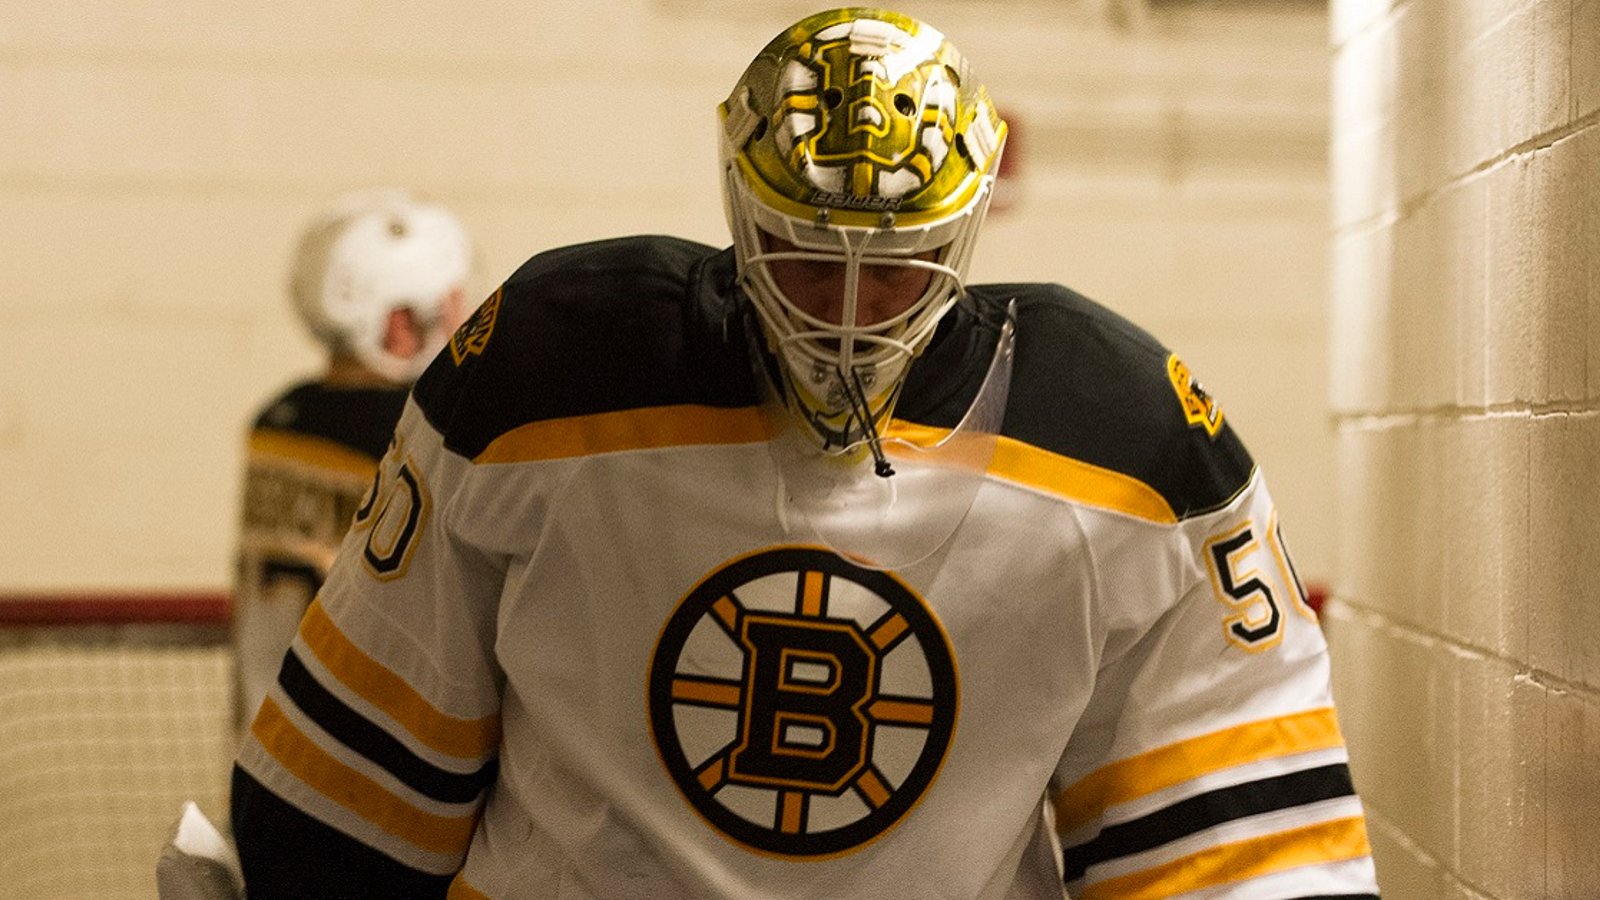 Breaking: Bruins lose yet another goaltender to injury, forced to make emergency replacement. 